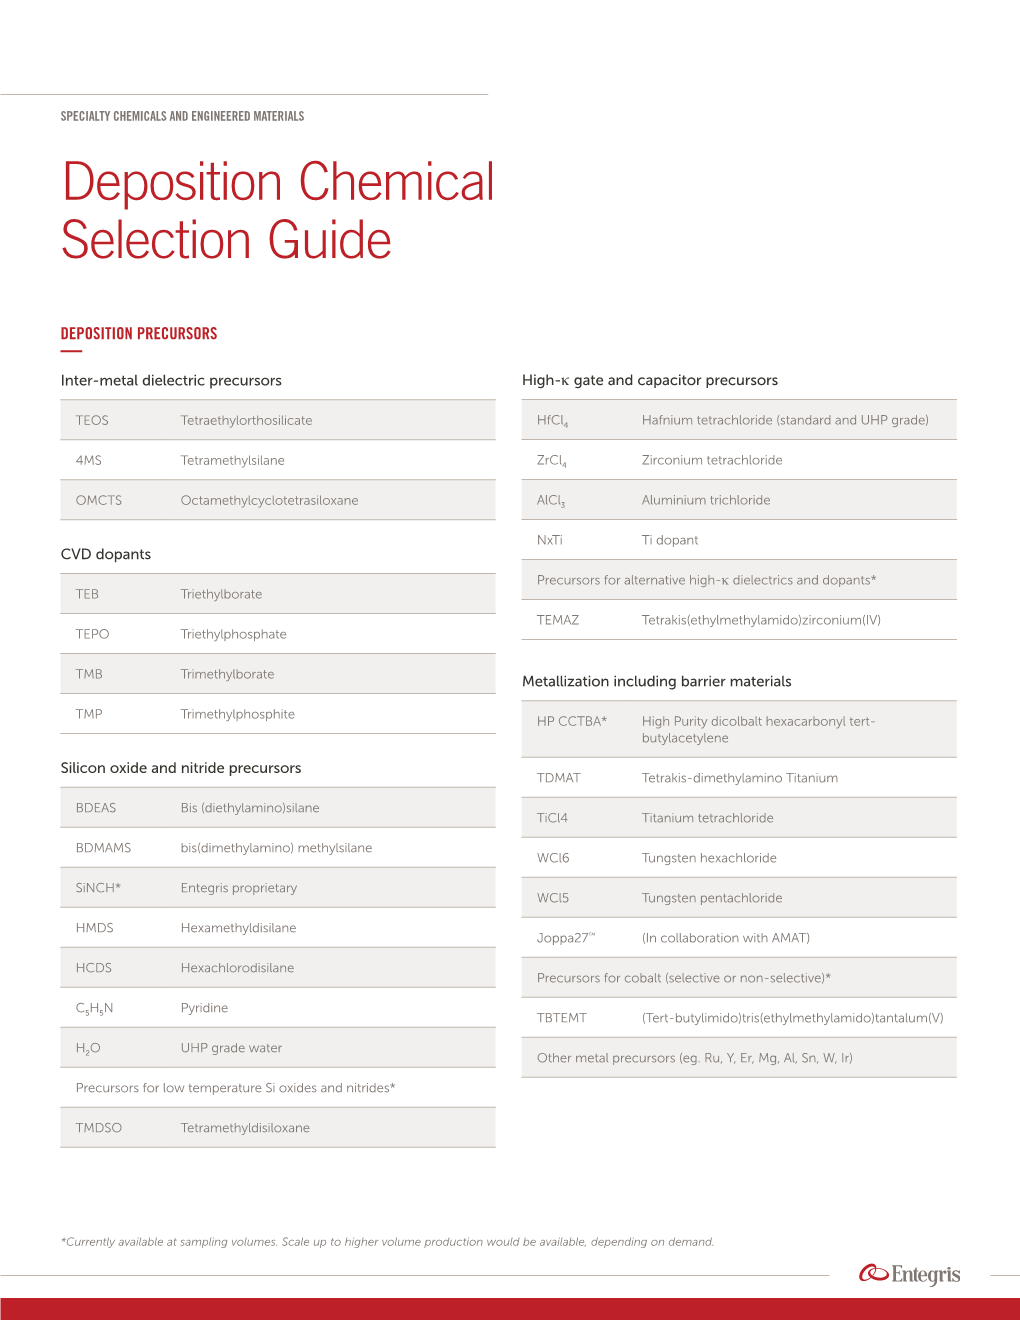 Deposition Chemical Selection Guide